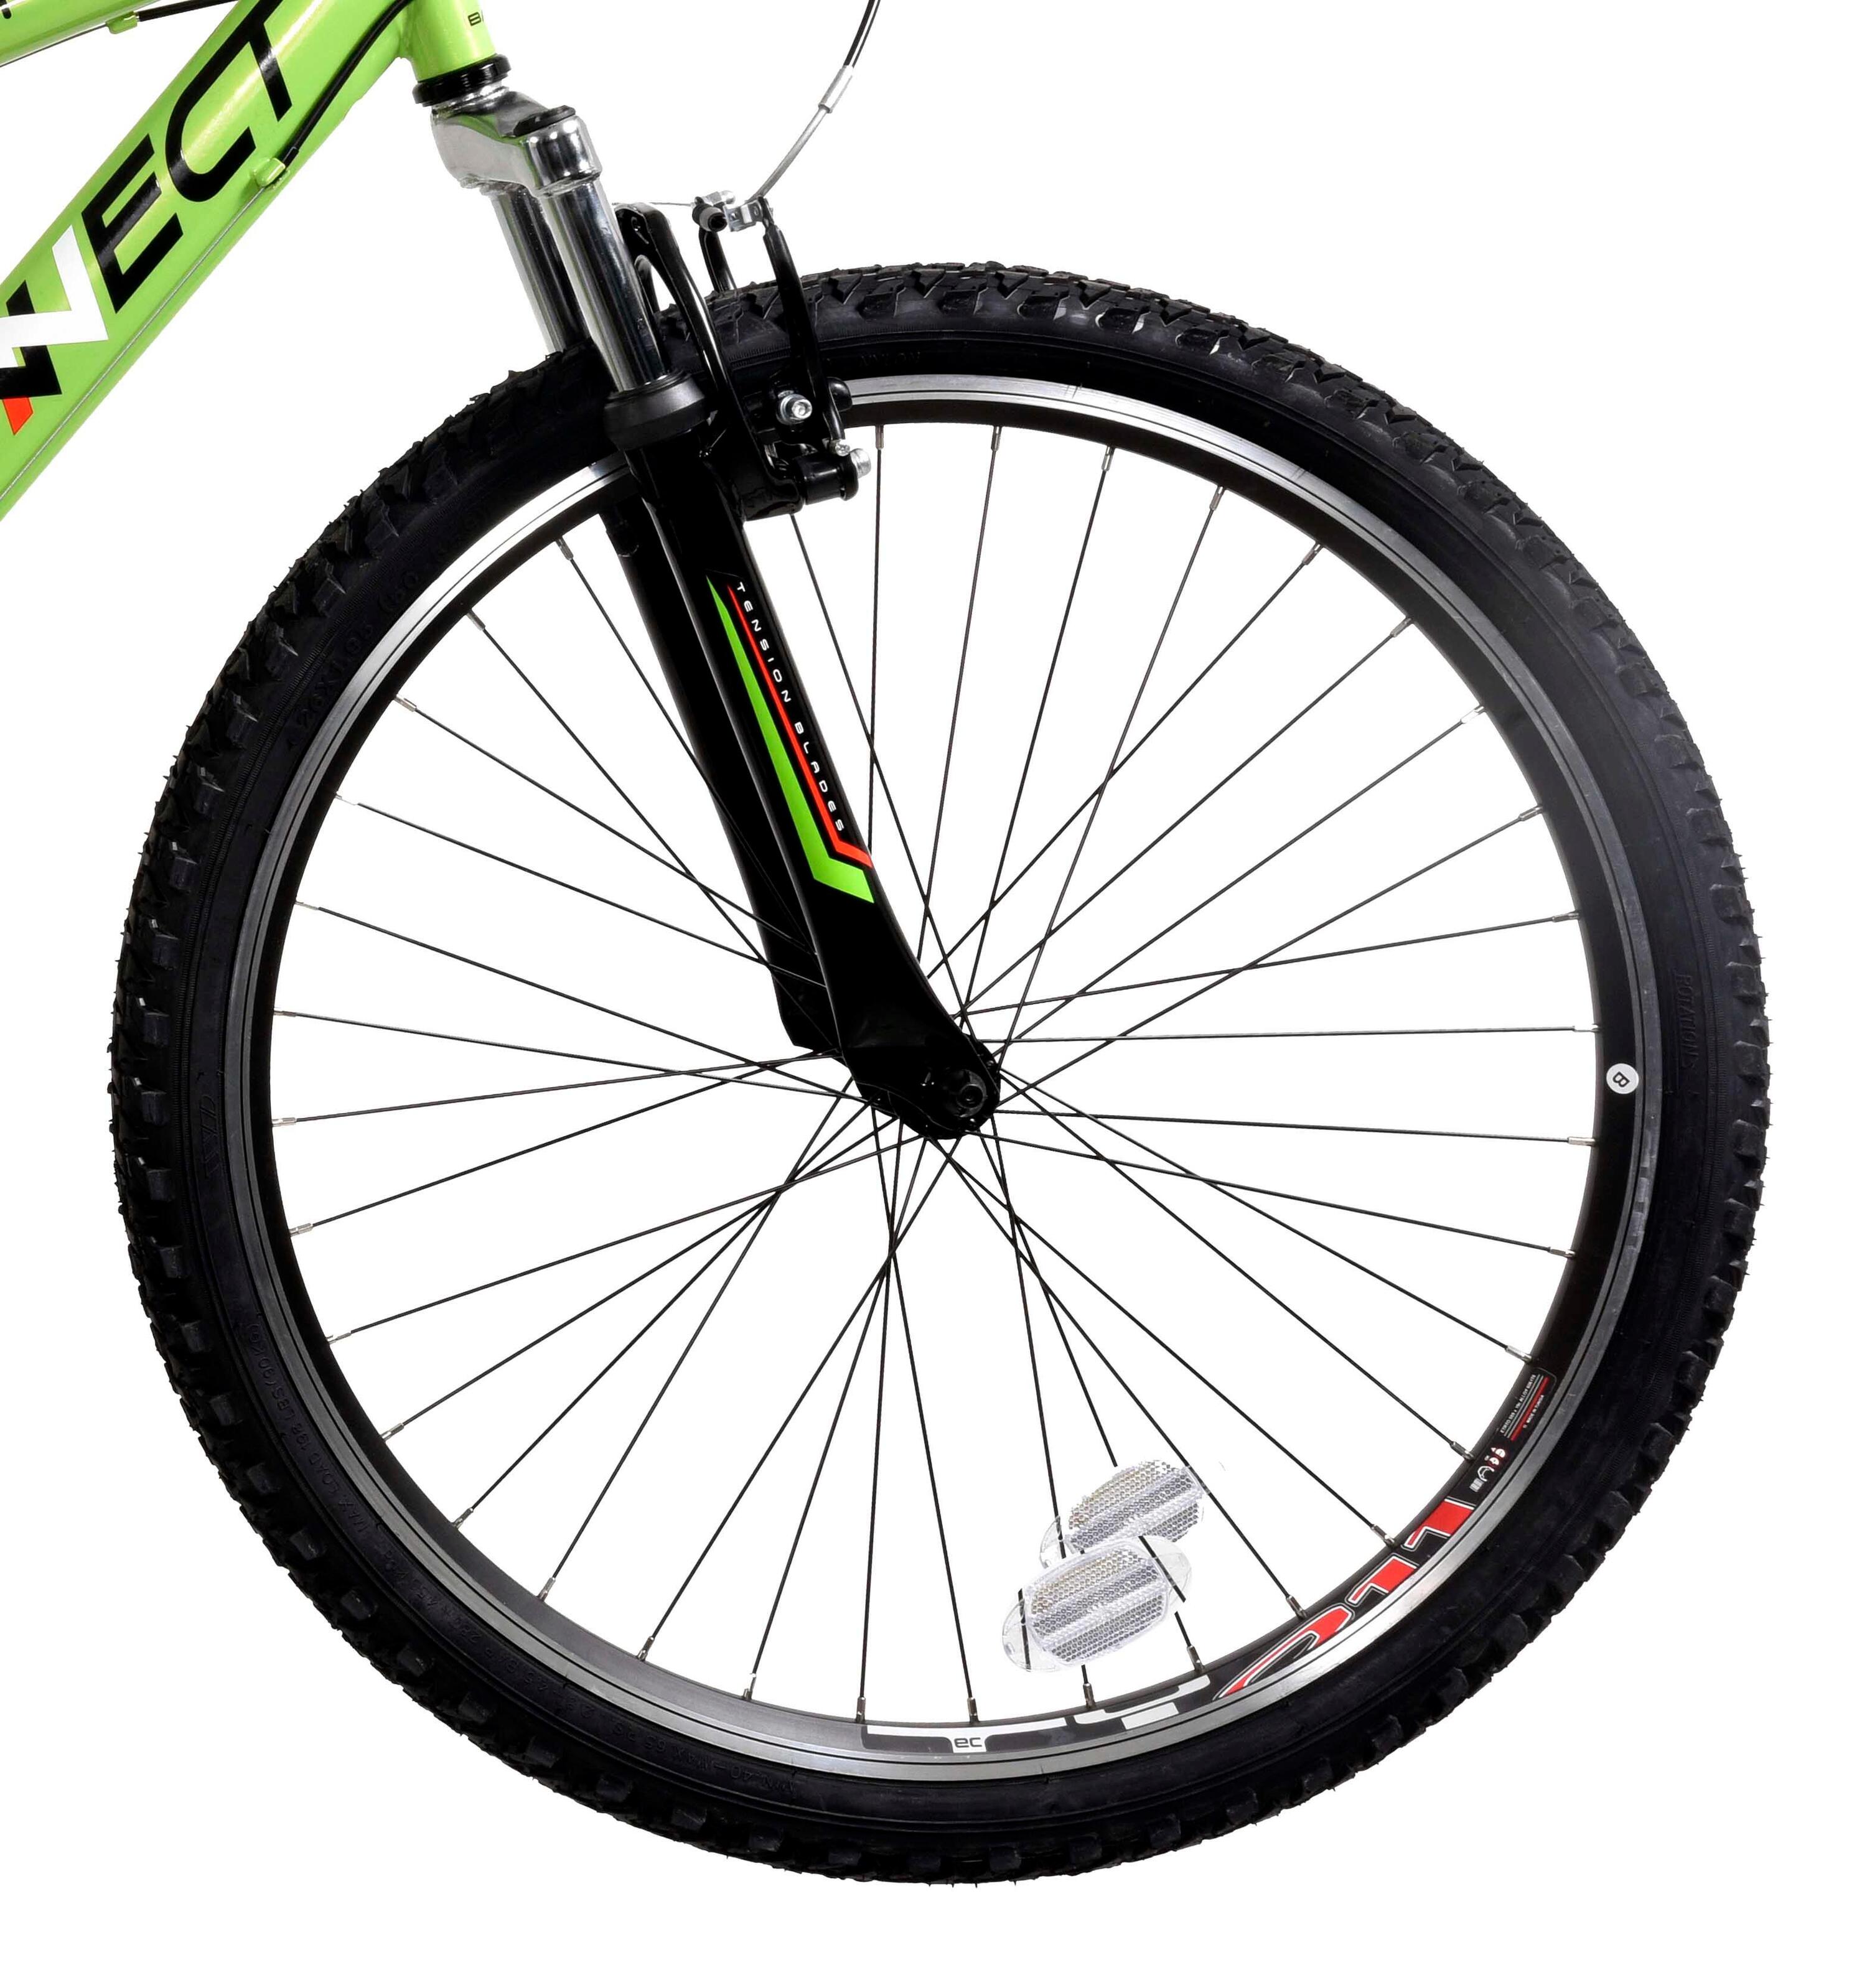 Basis Connect Adult's Hardtail Mountain Bike, 26In Wheel - Green/Black 4/5